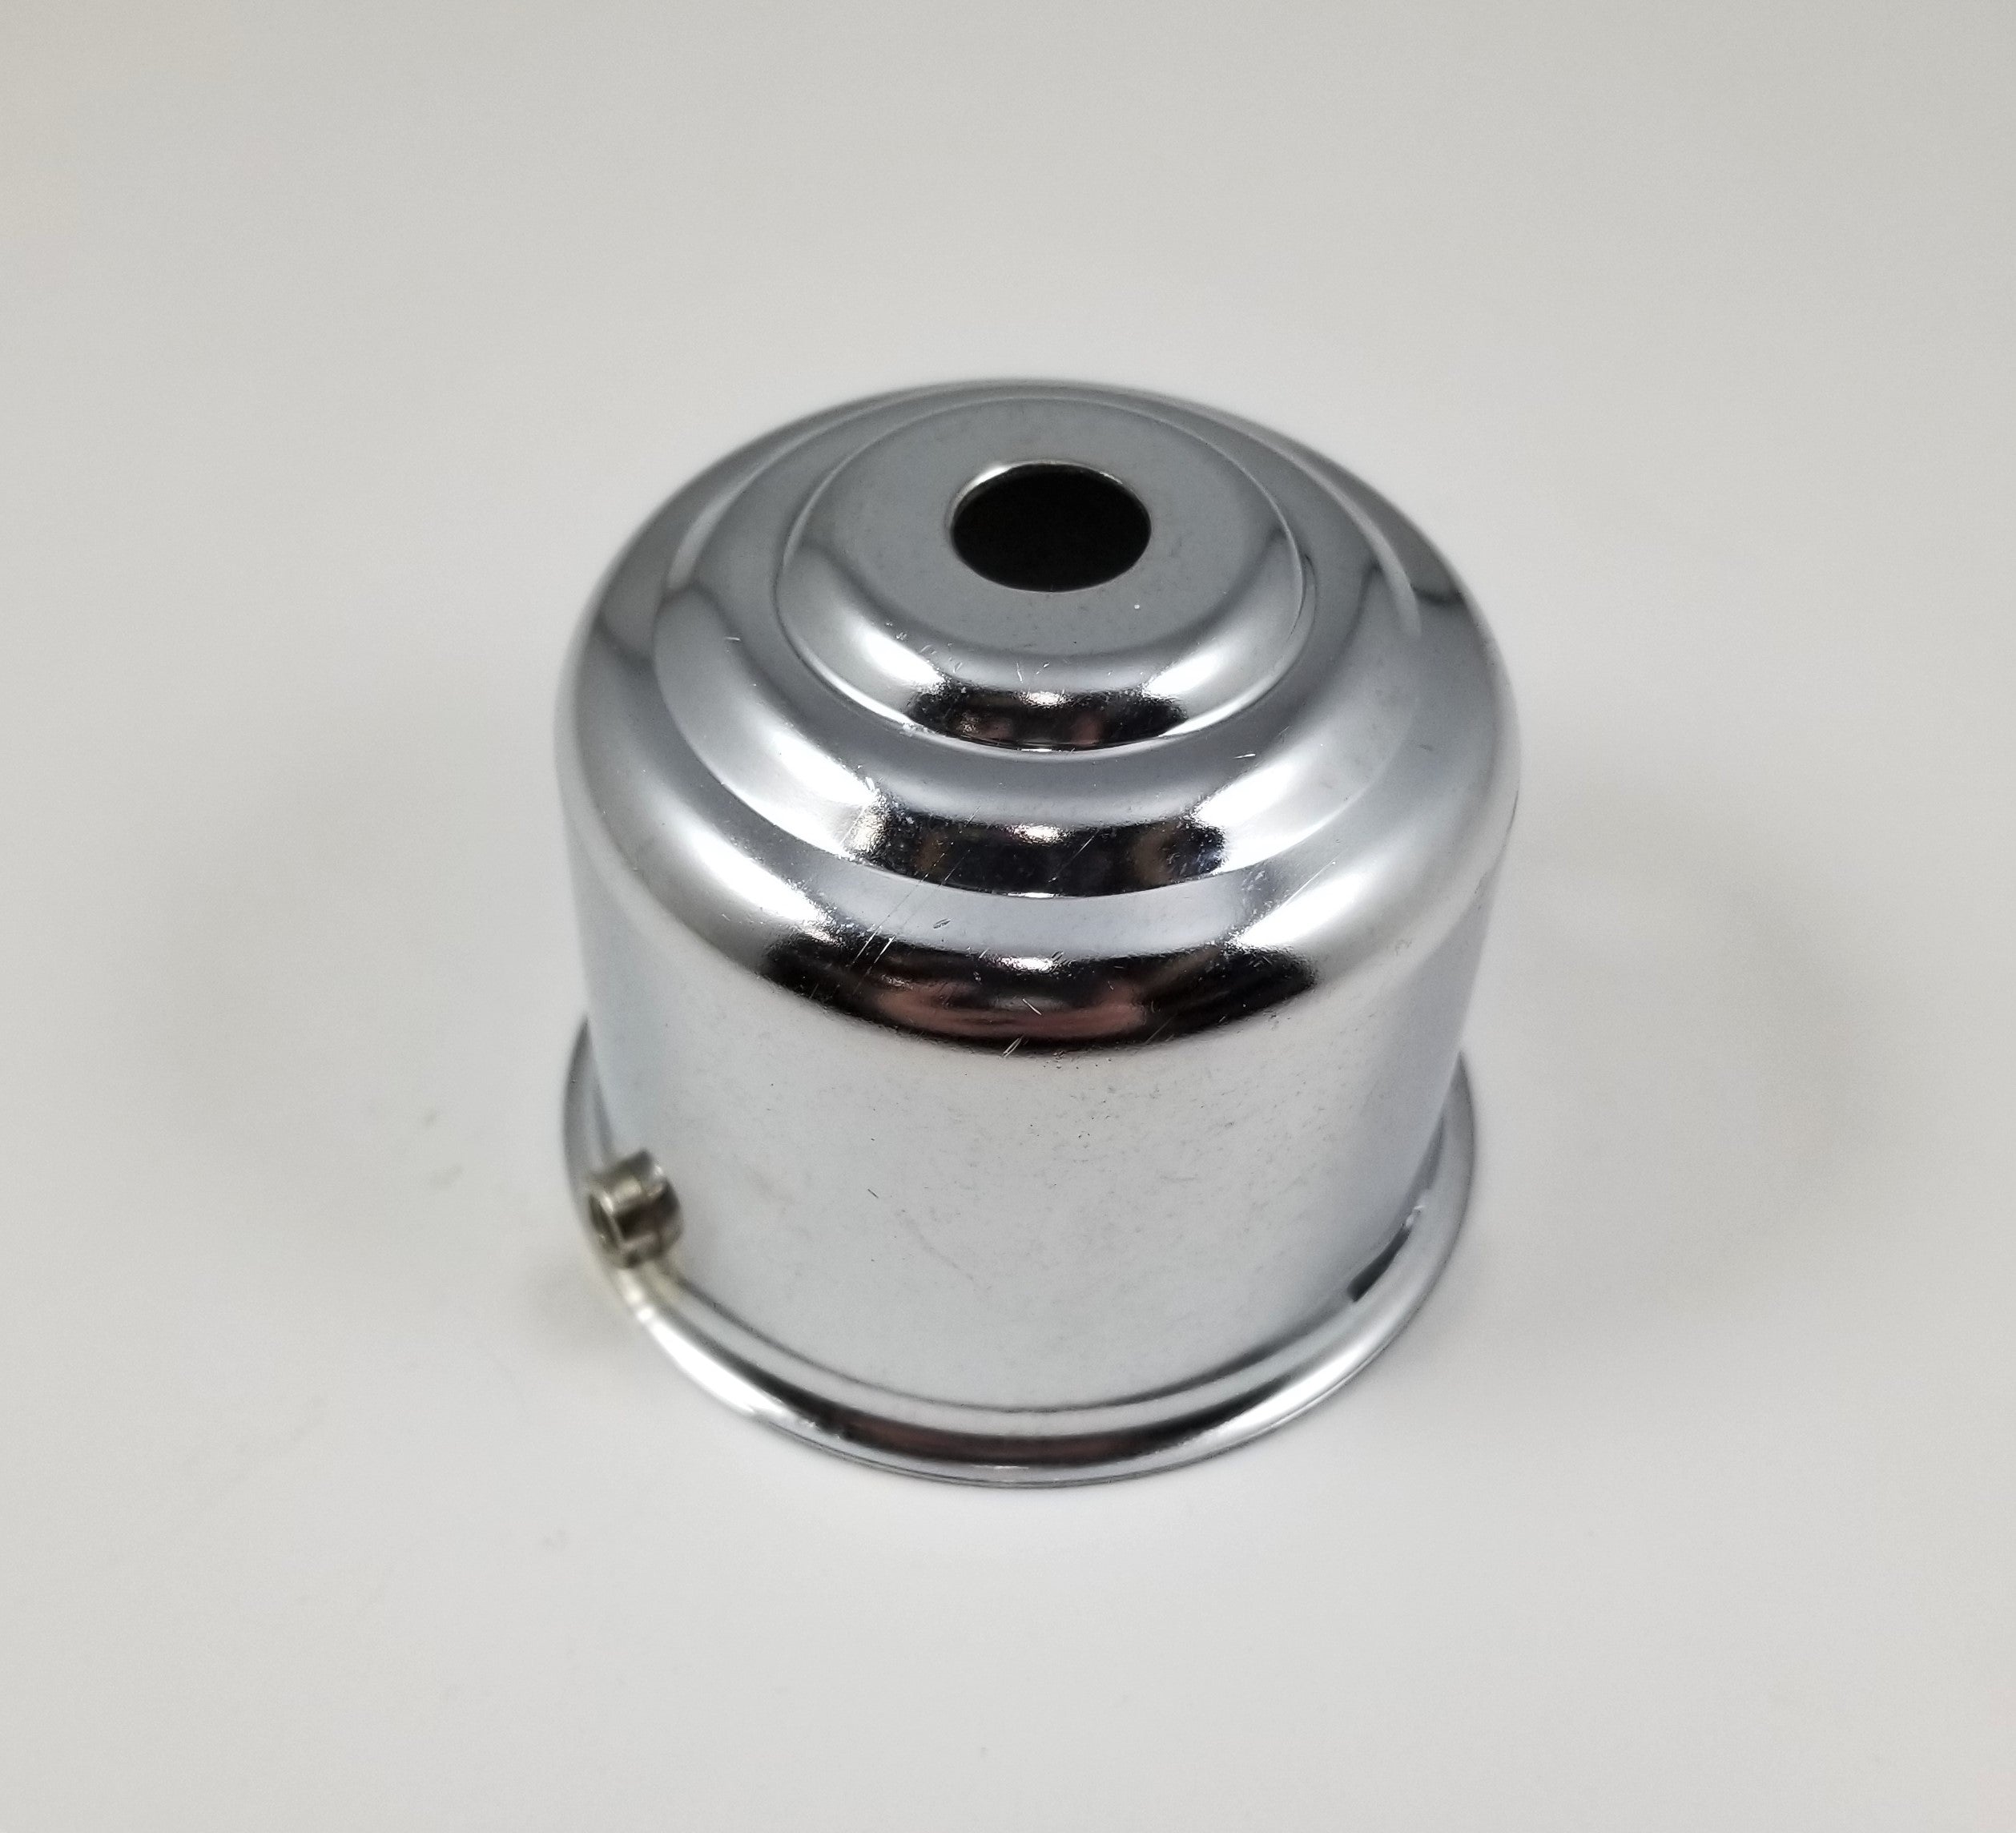 Steel - Nickel Plated - Holder for 2-1/8" Fitter